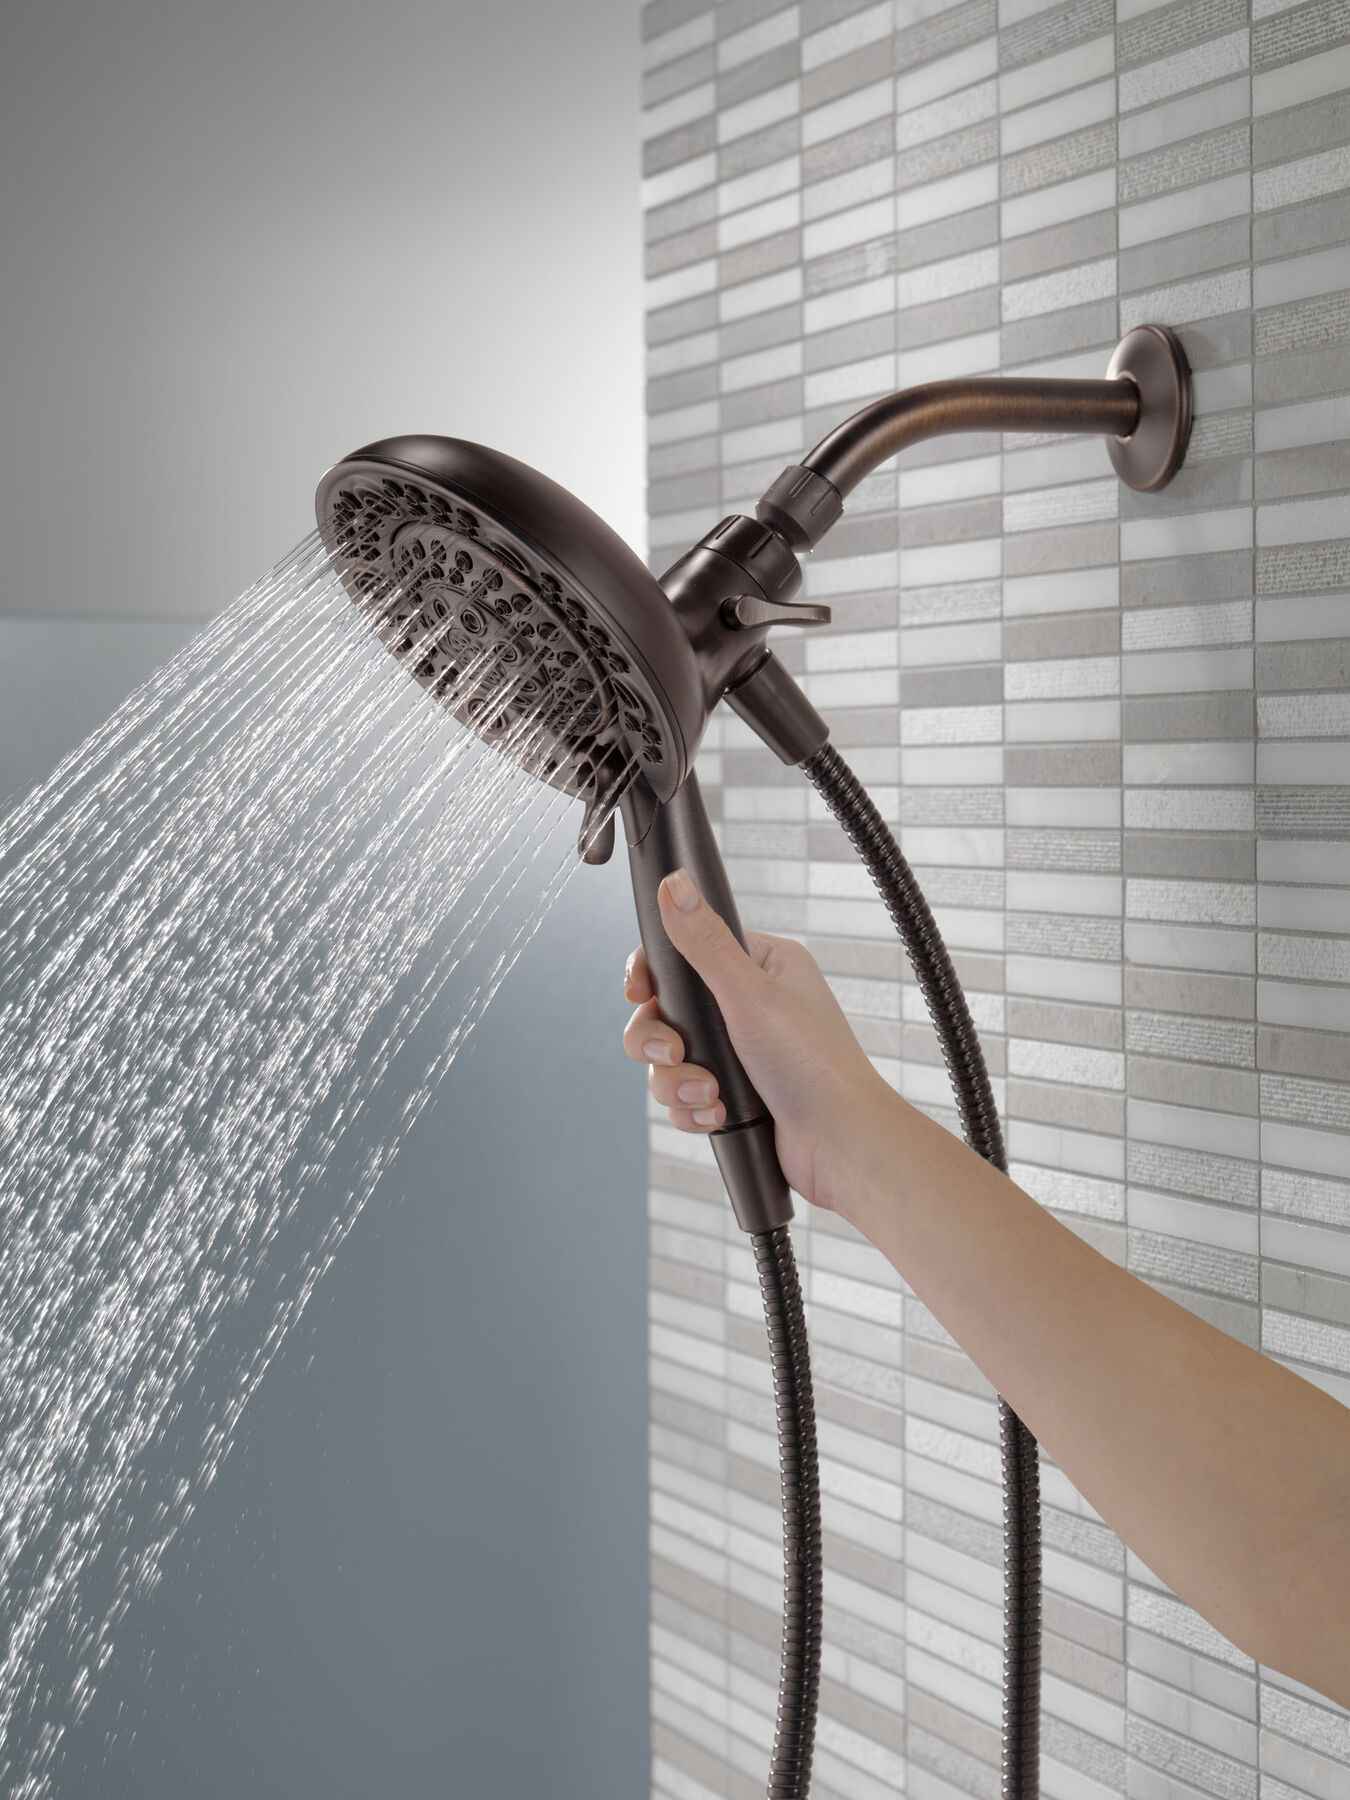 Showers and shower heads for all tastes